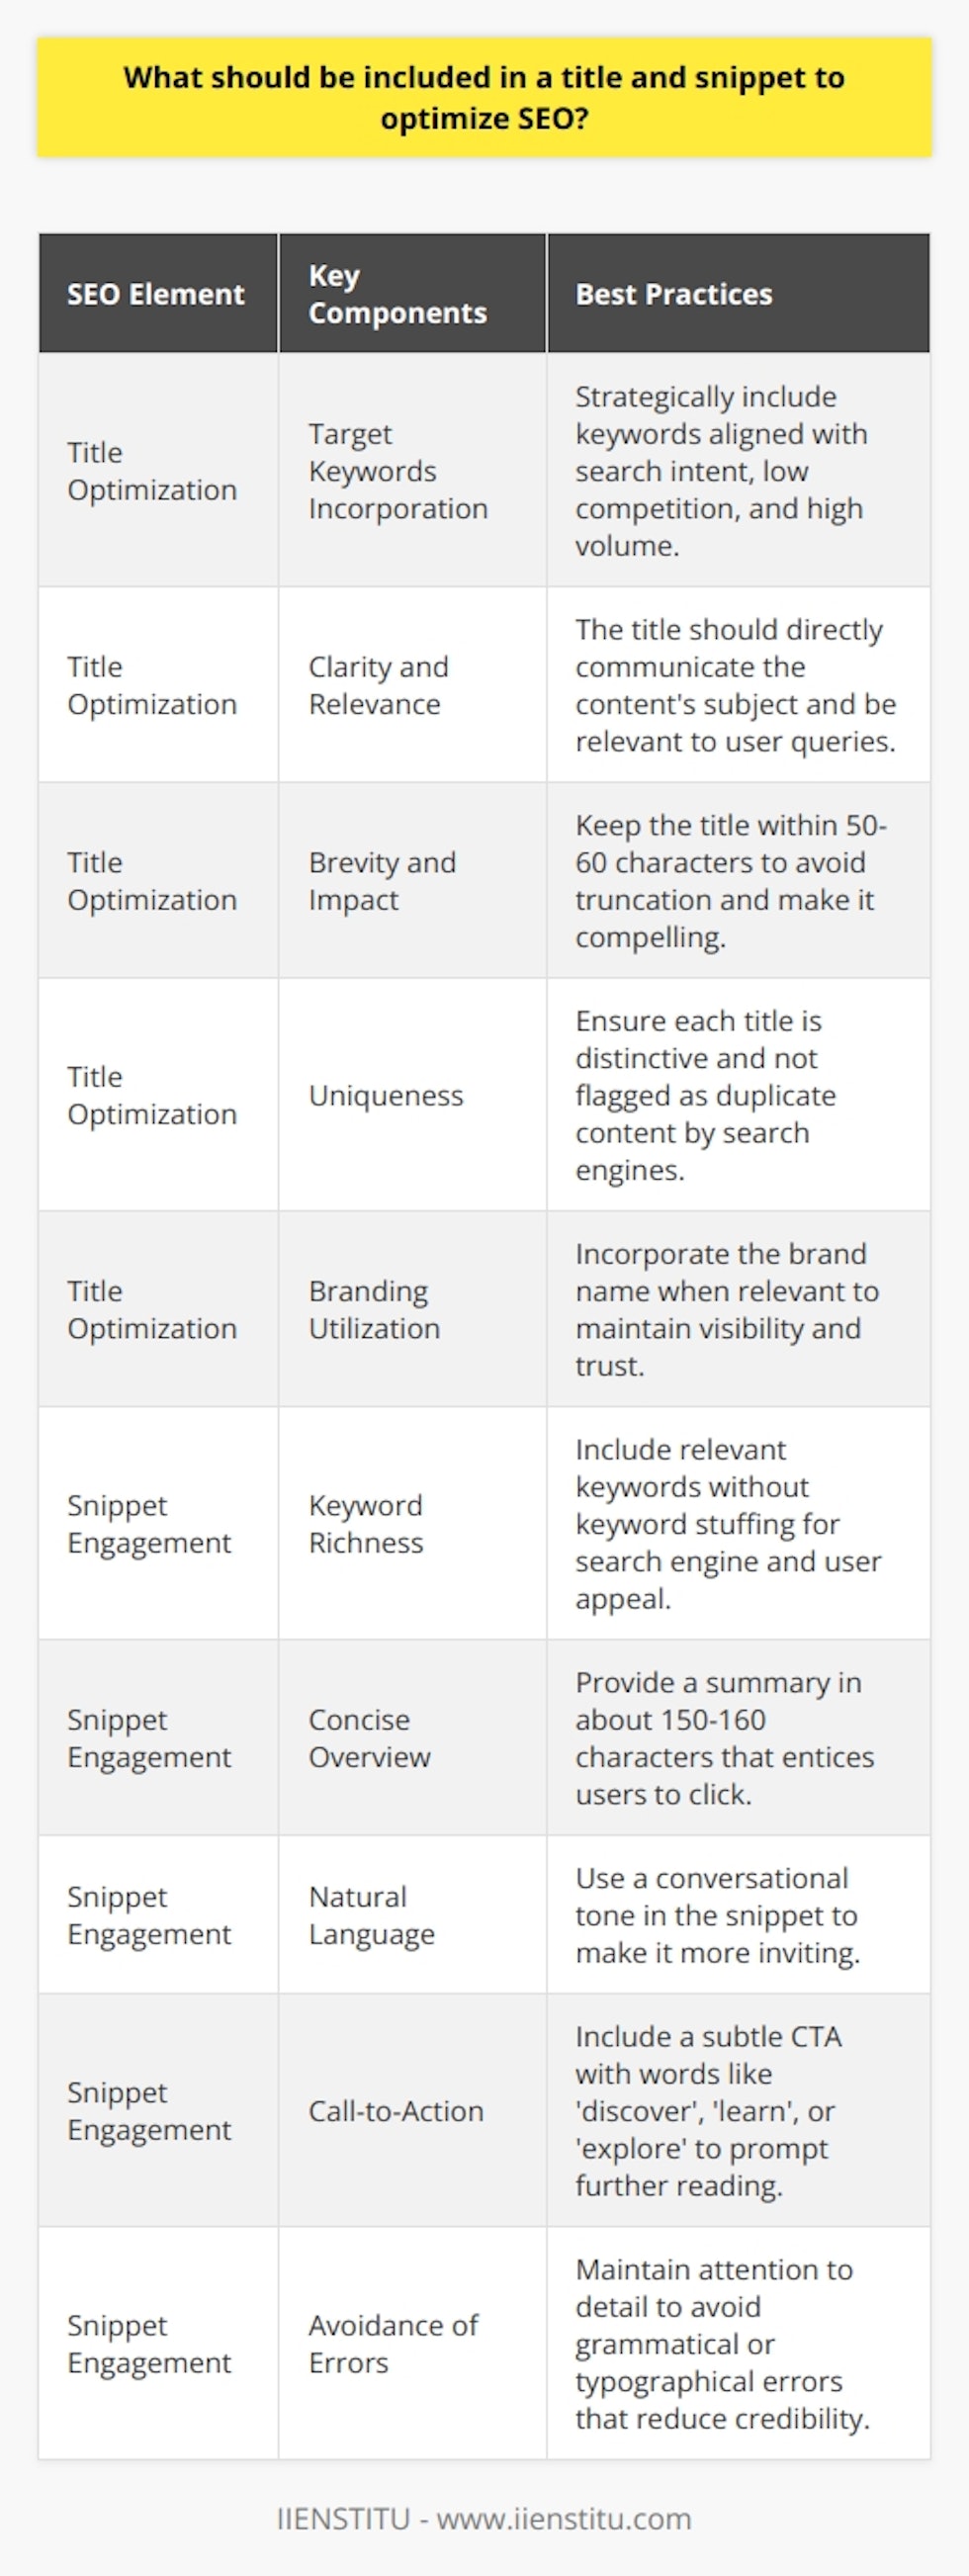 In the evolving landscape of digital marketing, SEO titles and snippets act as gateways, guiding the internet audience to the information they seek. Optimizing these elements is not just about pleasing search engines; it's about connecting with and engaging a human audience. Below, we examine key components that should be incorporated into titles and snippets for SEO prowess.**SEO-optimized Titles**1. **Incorporation of Target Keywords**: One should strategically include target keywords within the title. These keywords should align with the search intent of the potential audience. Researching the right keywords with low competition and high search volume can give the title an edge to rank better.2. **Clarity and Relevance**: The title must be clear, directly communicating the content's subject. It must establish relevance to the query and set accurate expectations for the reader.3. **Brevity and Impact**: Conciseness is key in title creation. It should ideally be between 50-60 characters to avoid truncation in search results. Despite its compact nature, it should be compelling and convey the essence of the content.4. **Uniqueness**: Each title should be distinctive to the individual blog post, helping to avoid confusion with other content and ensuring that search engines don't flag it as duplicate content.5. **Utilization of Branding**: When relevant, include the brand name. For instance, IIENSTITU could be included towards the end of the title to maintain brand visibility and trust, especially if the content is about educational resources or online learning.**Engaging Snippets**1. **Keyword Richness**: Just like the title, the snippet should include relevant keywords without keyword stuffing, as it may appear spammy and deter readers.2. **Concise Overview**: In about 150-160 characters, the snippet should summarize the blog post's core message or tease an interesting point that promises more in-depth insights, compelling users to click.3. **Natural Language**: The snippet should read naturally as if speaking to the reader. An approachable and conversational tone can be more inviting than jargon-heavy text.4. **Call-to-Action (CTA)**: A subtle CTA can be effective. Words like 'discover', 'learn', or 'explore' can entice users to delve deeper into your content.5. **Avoidance of Errors**: Any grammatical or typographical errors in the snippet can reduce credibility and lower click-through rates. Thus, maintaining utmost attention to detail is crucial.Crafting SEO-optimized titles and snippets is an art that combines creativity with SEO best practices. Titles should act as bold signages, catching user attention, while snippets should invite curiosity, leading to higher engagement. Together, these elements work symbiotically to enhance the visibility and appeal of blog content within SERPs, creating opportunities for increased traffic and higher search rankings in the competitive digital space.